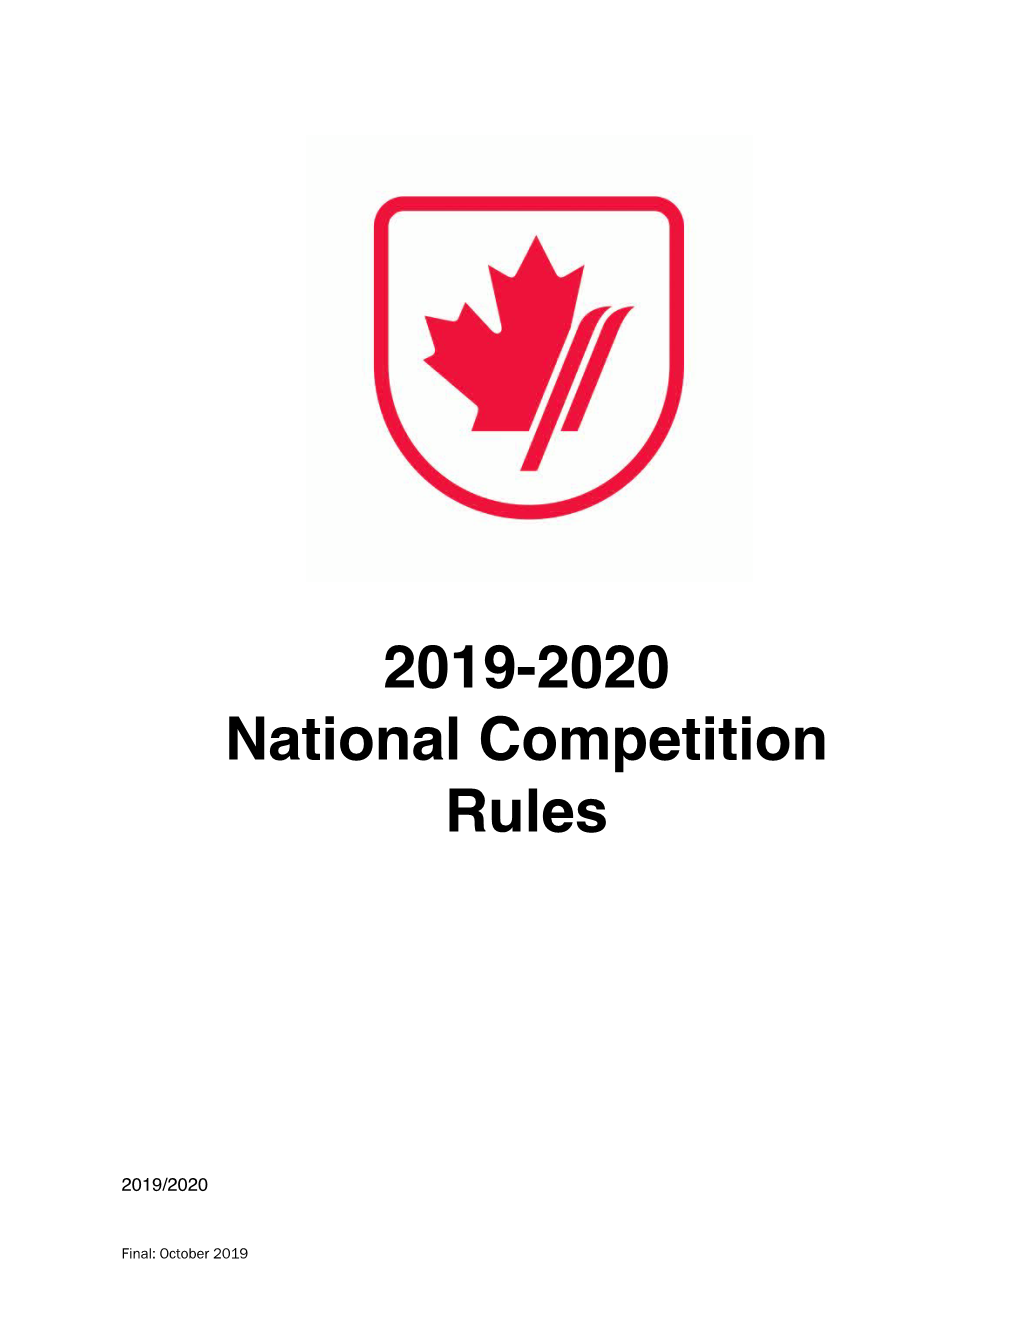 2019-2020 National Competition Rules